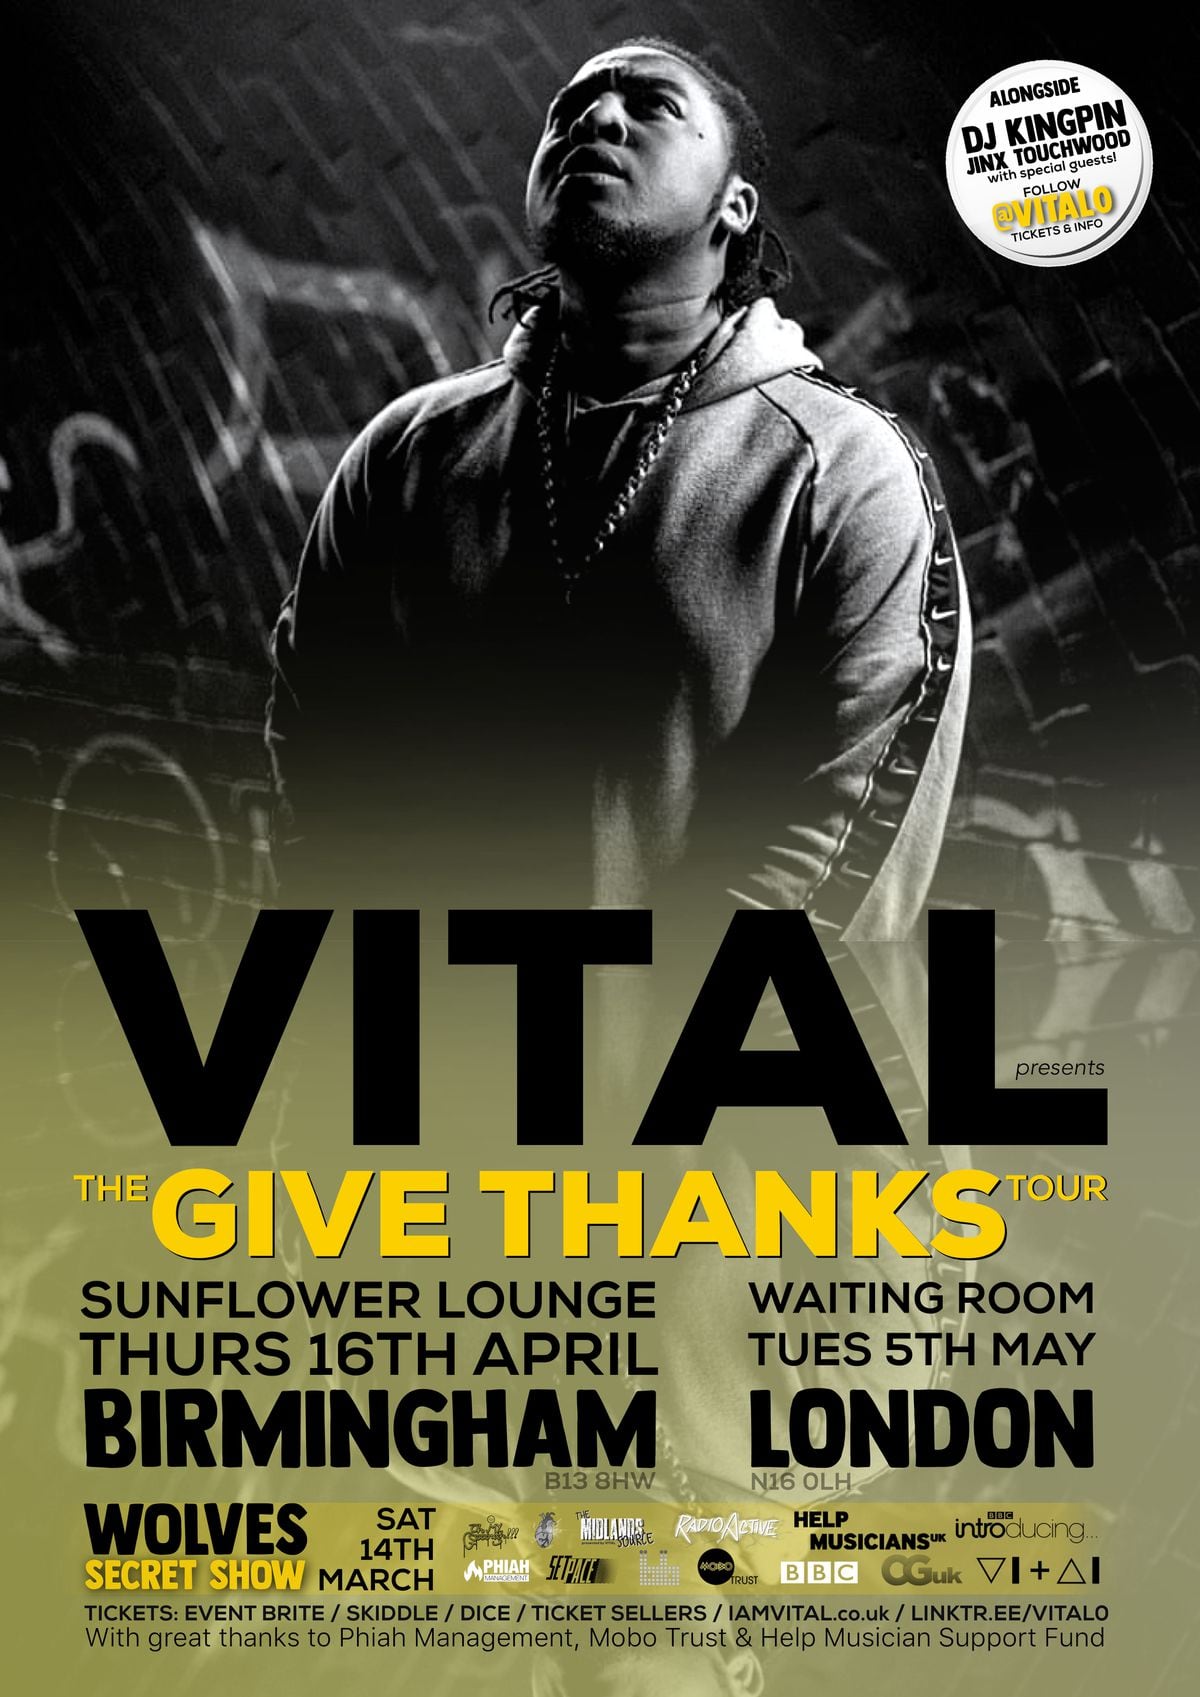 The poster for Wolverhampton's VITAL's upcoming shows